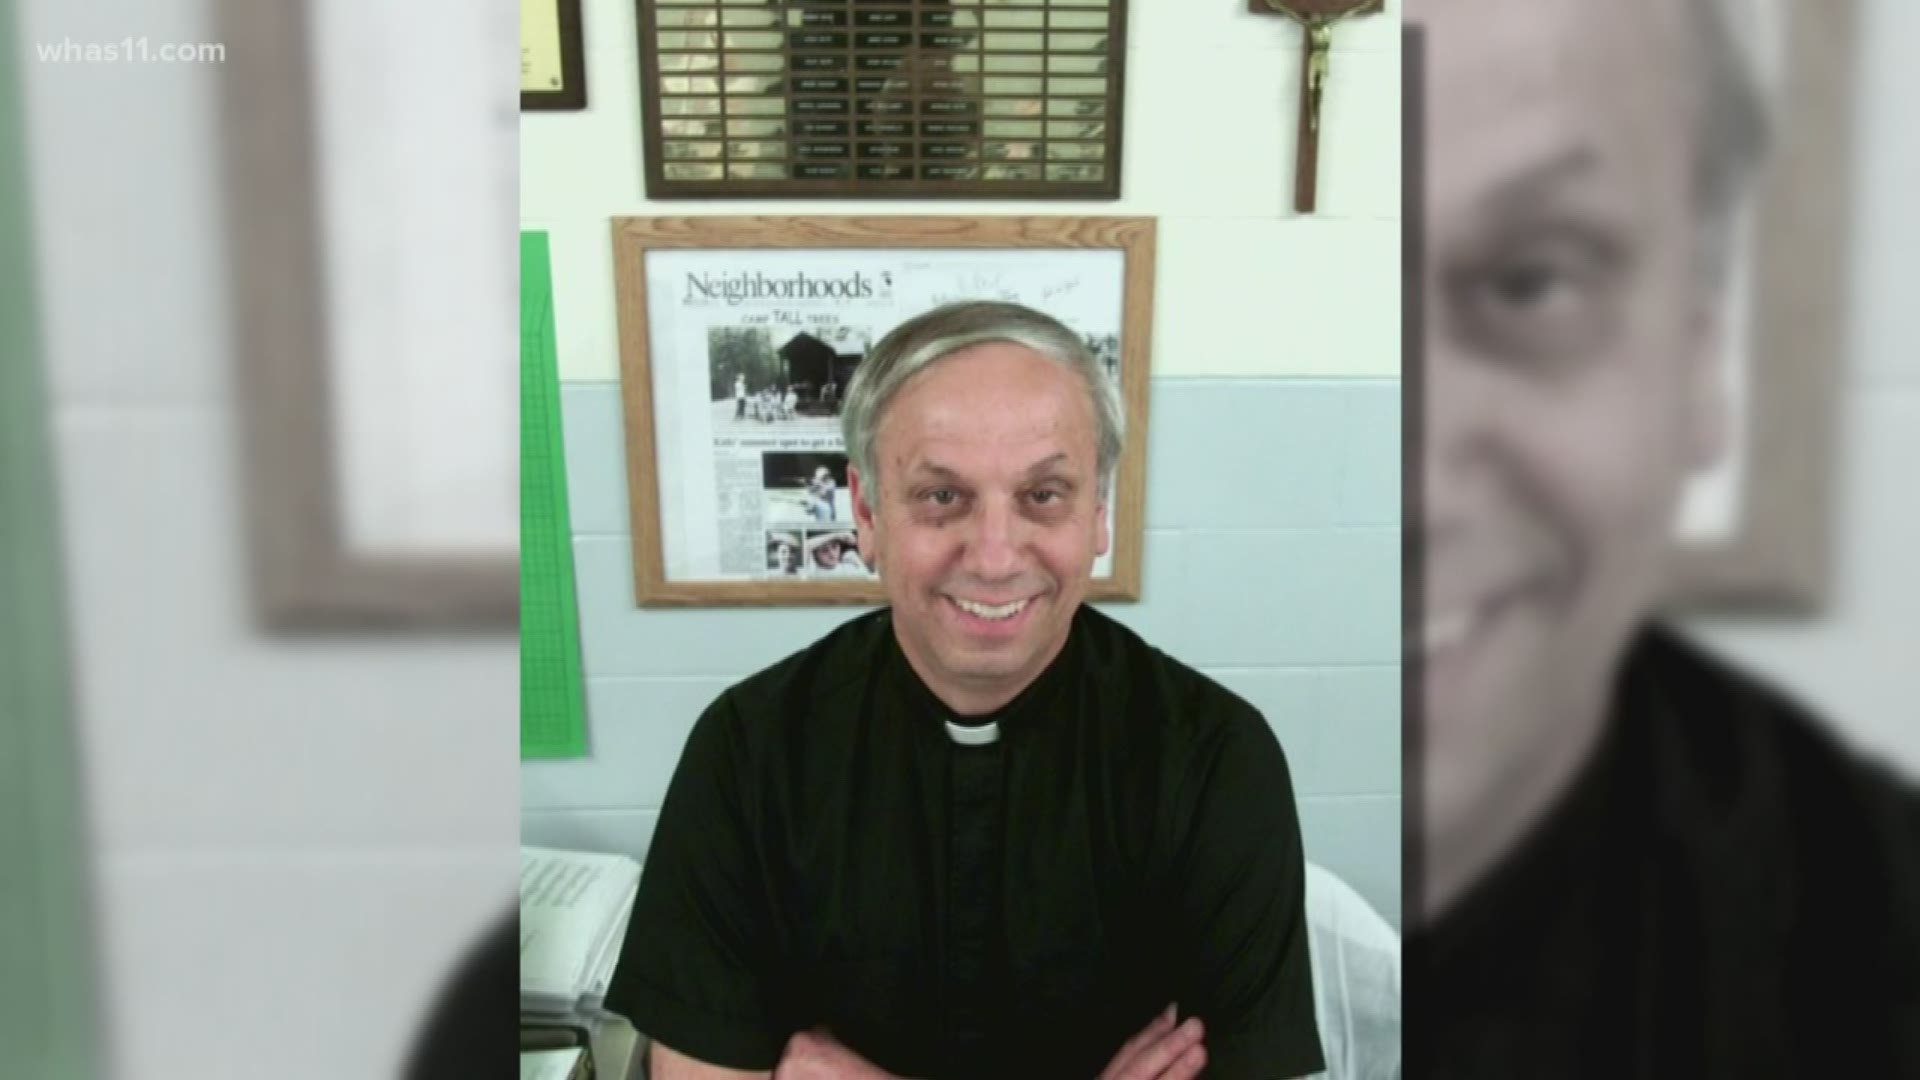 Father Joseph Hemmerle is serving 9-years in prison for two separate cases.